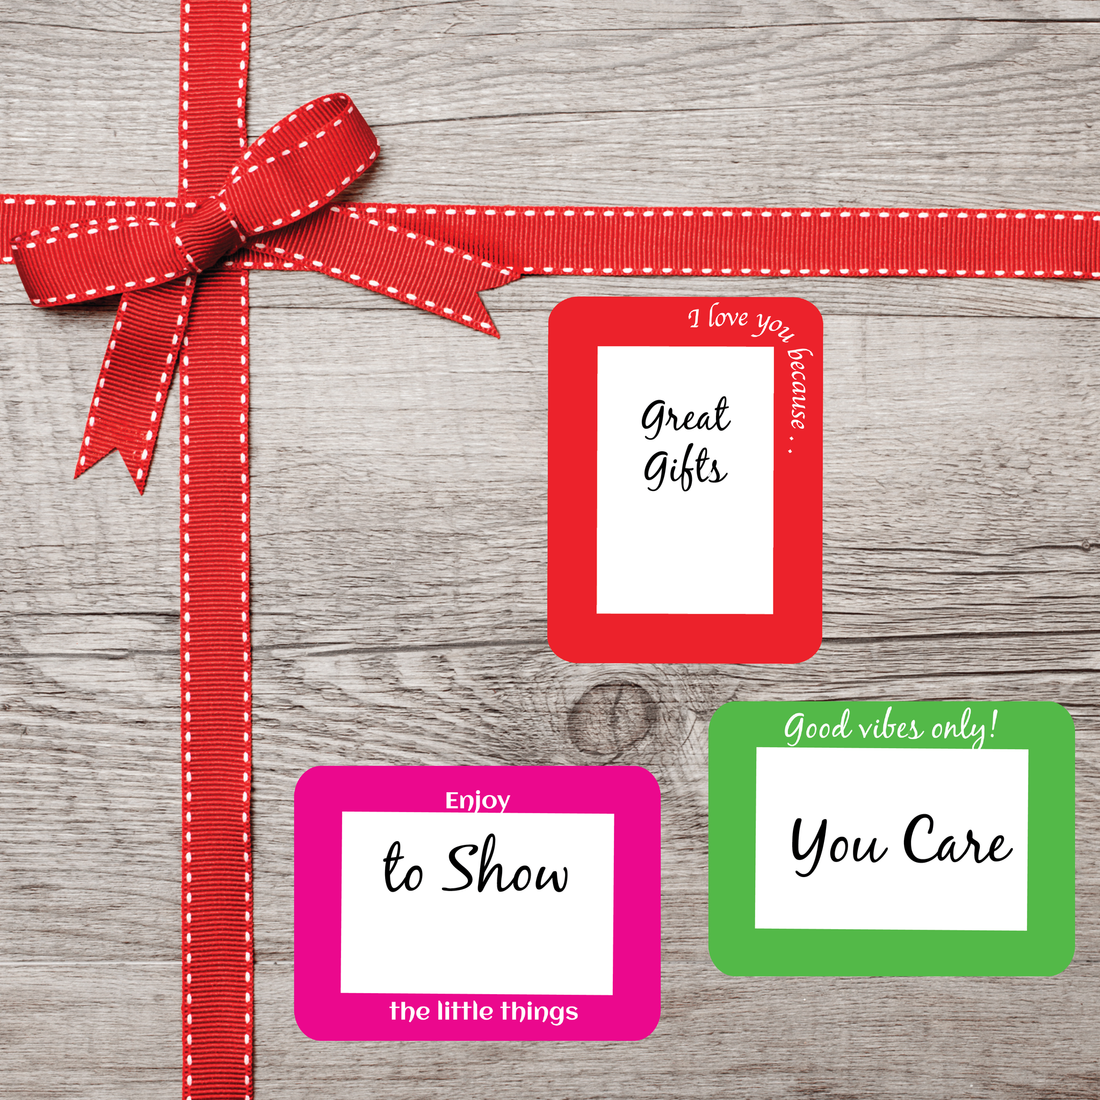 2016 Fodeez® Adhesive Frames Gift Guide